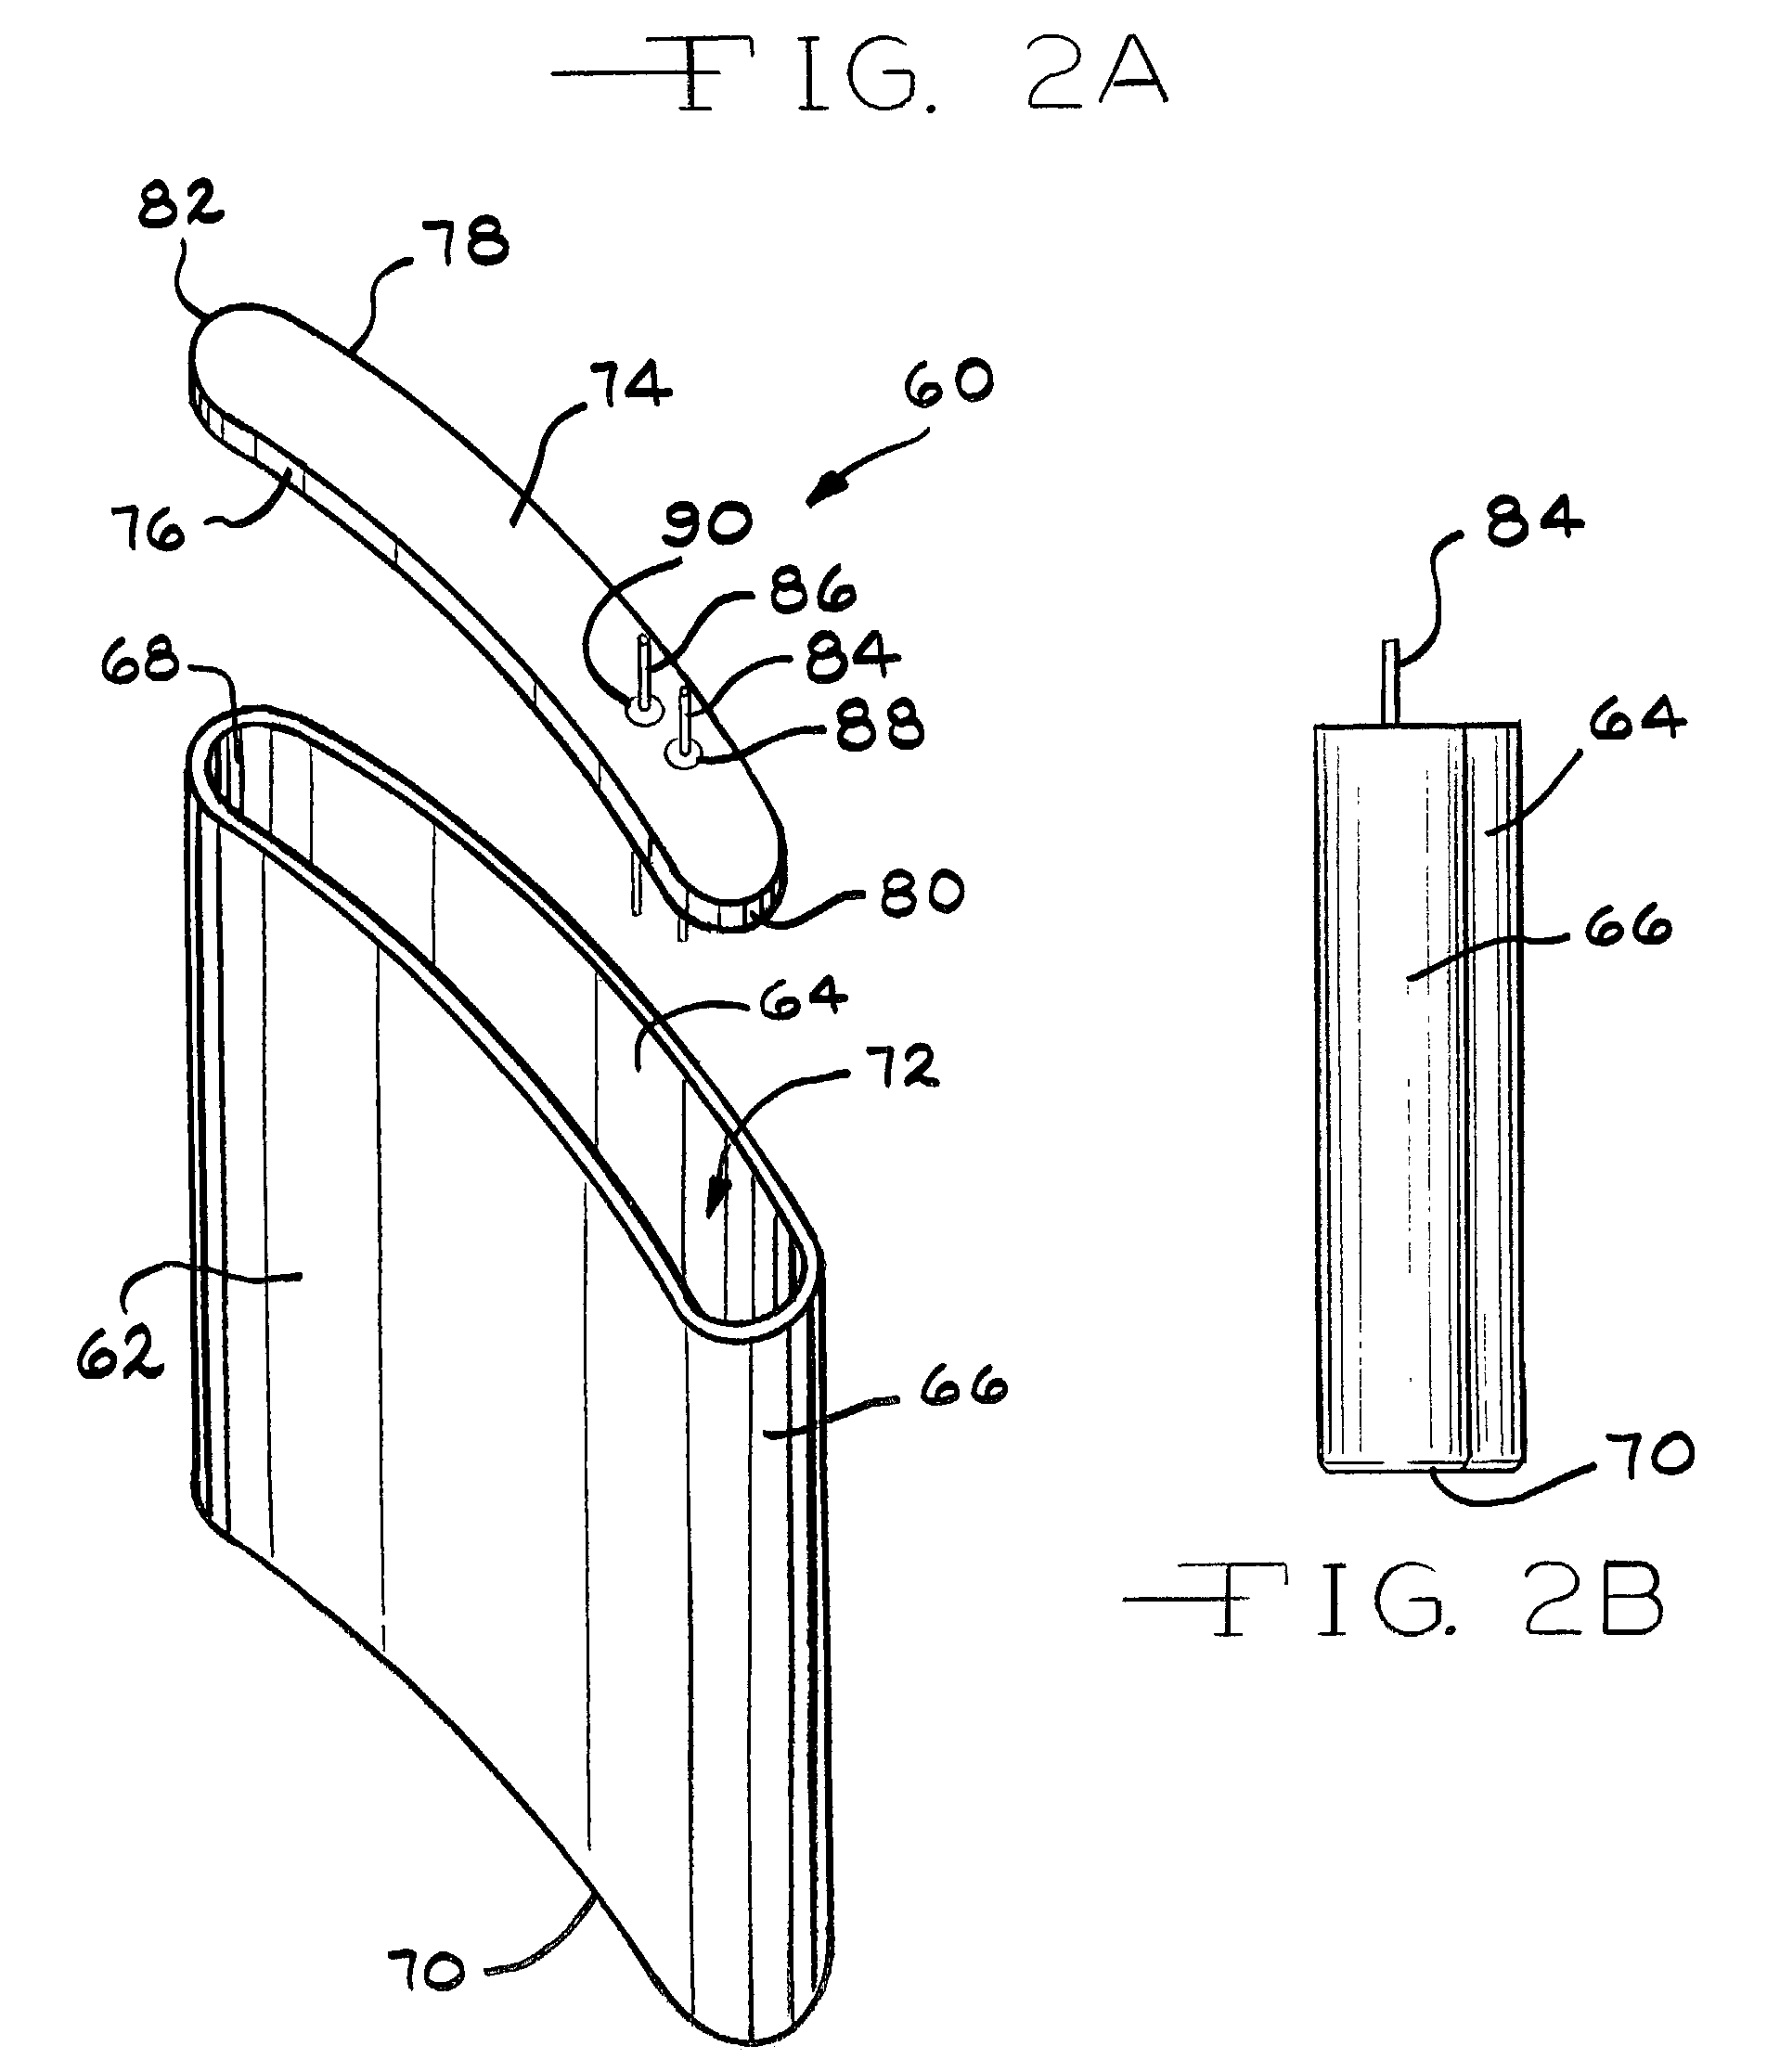 Contoured housing for an implantable medical device